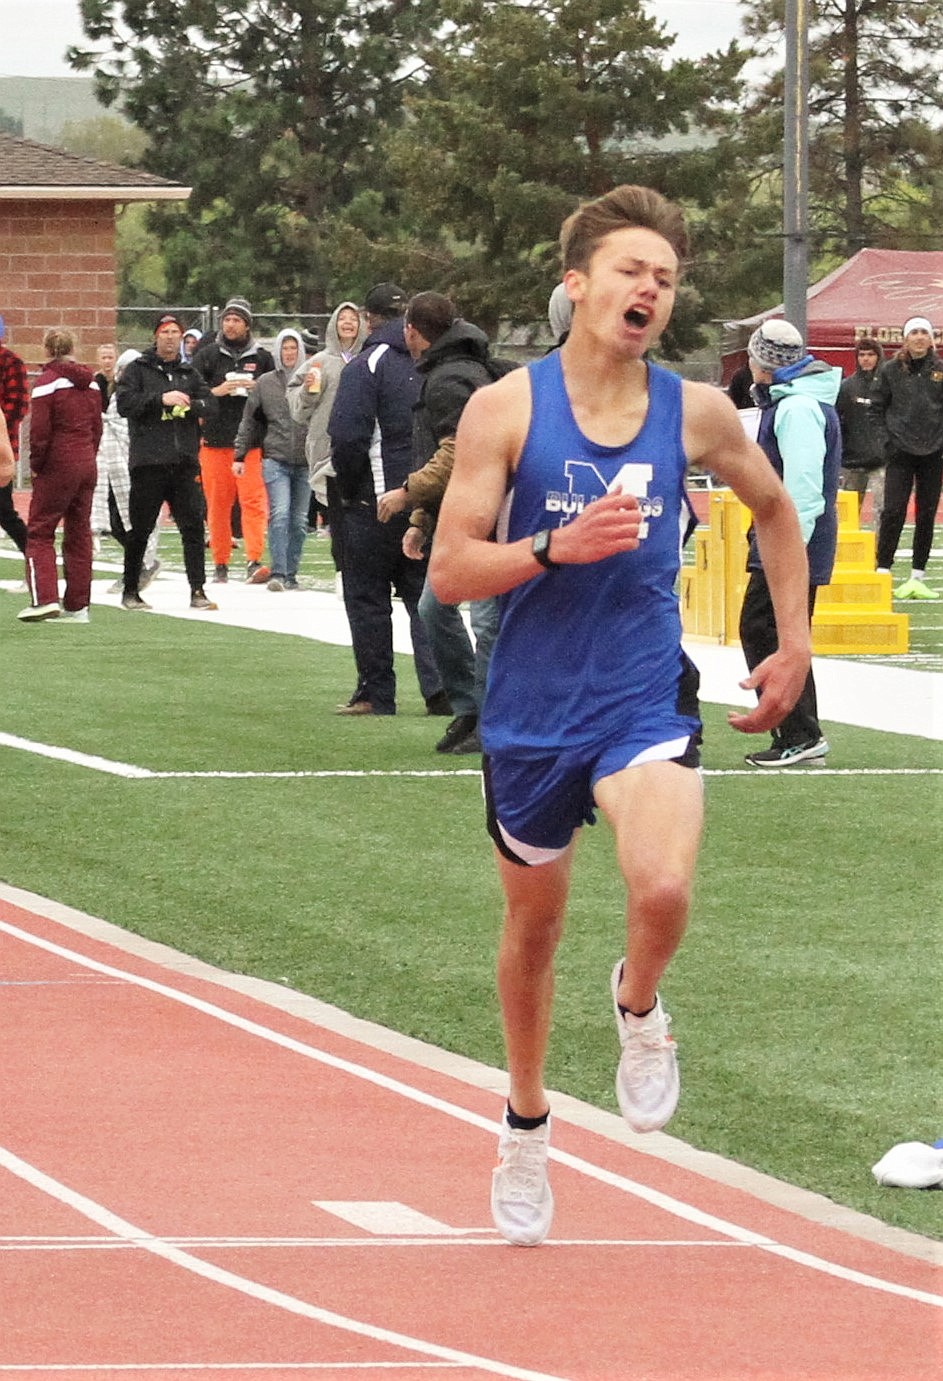 Andrew Rush of Mission won the 800 meters at the Western B divisional meet at Missoula. (Courtesy of Daisy Adams)